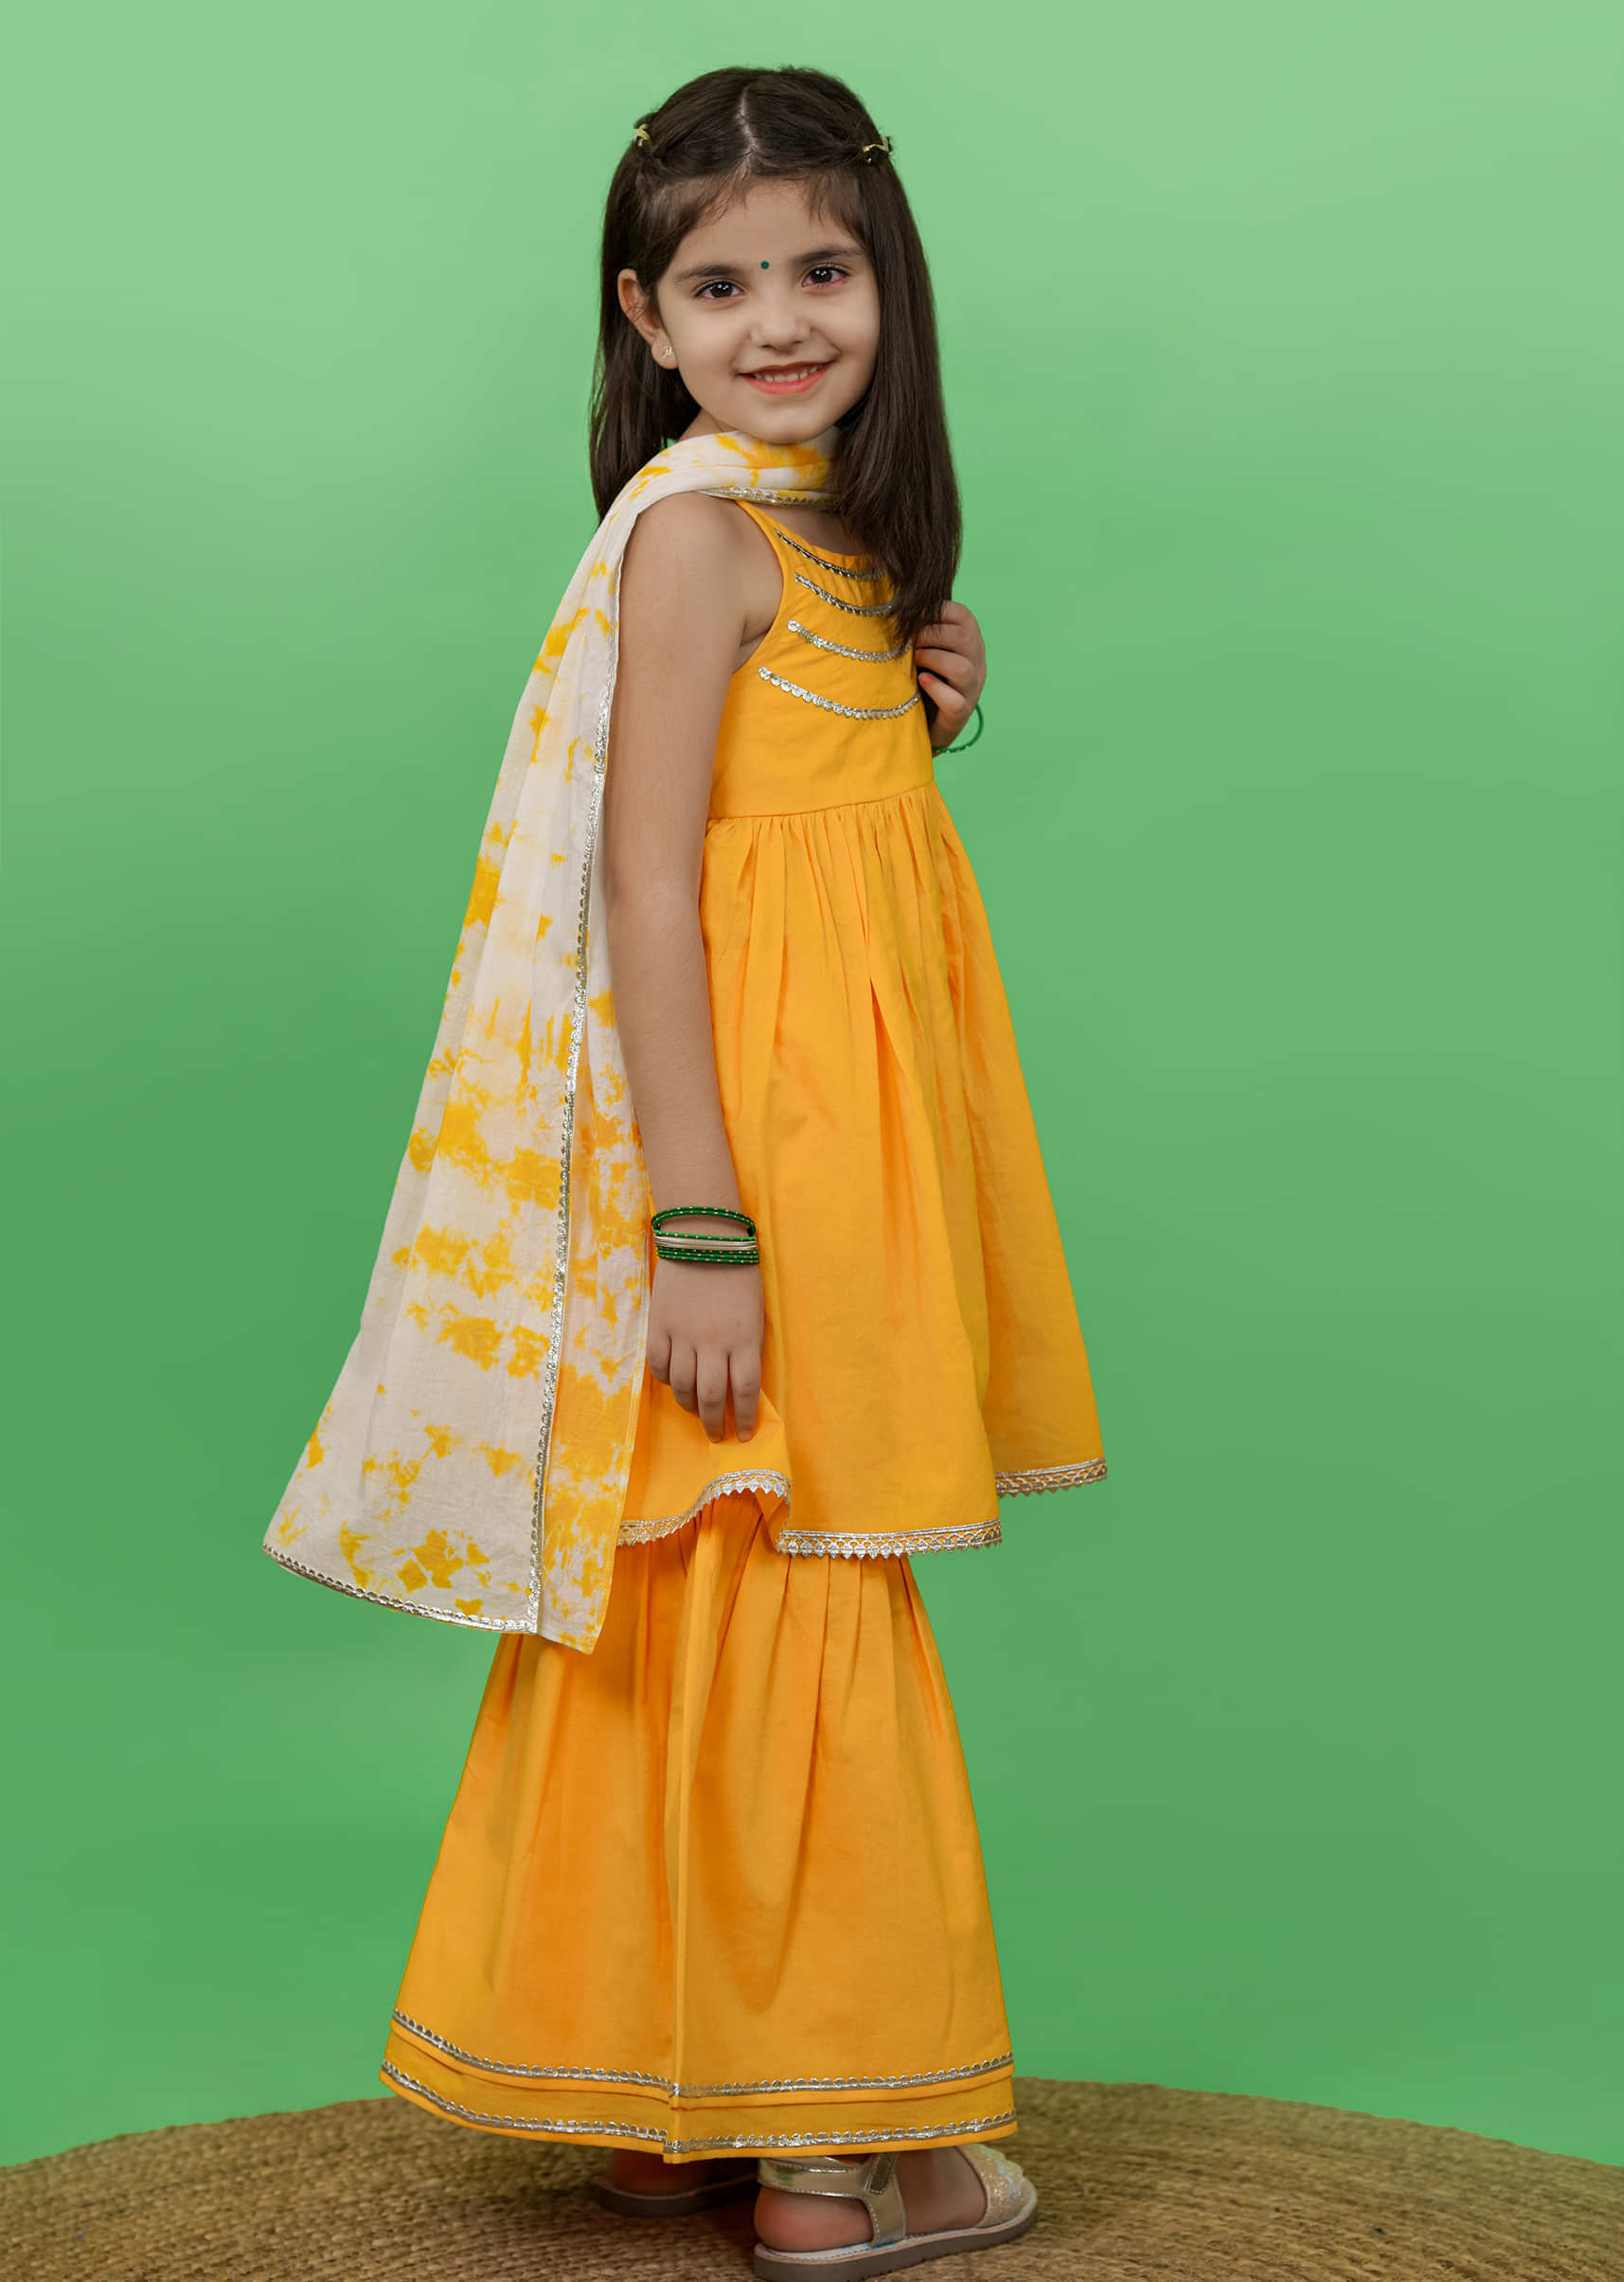 Kalki Girls Yellow Sharara Suit In Cotton With Gotta Patti Embroidery And A Tie Dye Dupatta By Tiber Taber